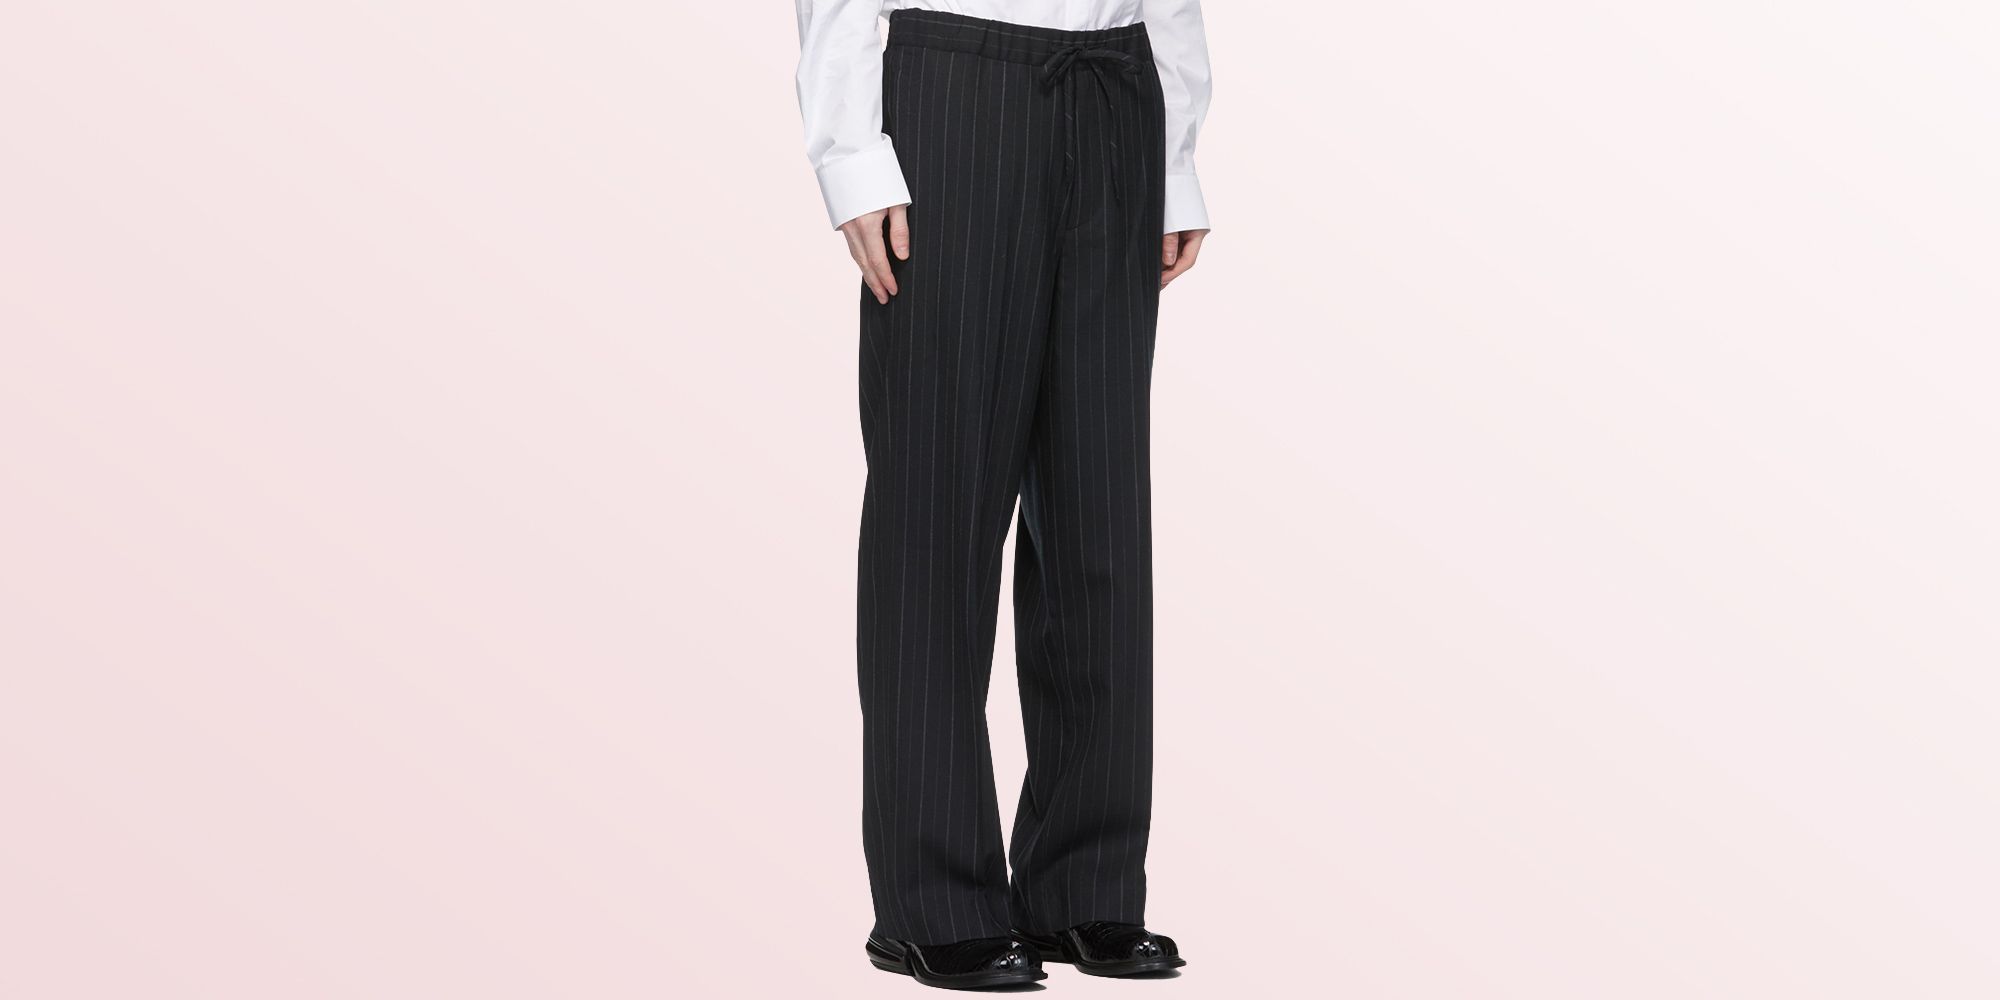 Benevento Men's pleated tropical wool lightweight trousers – BENEVENTO